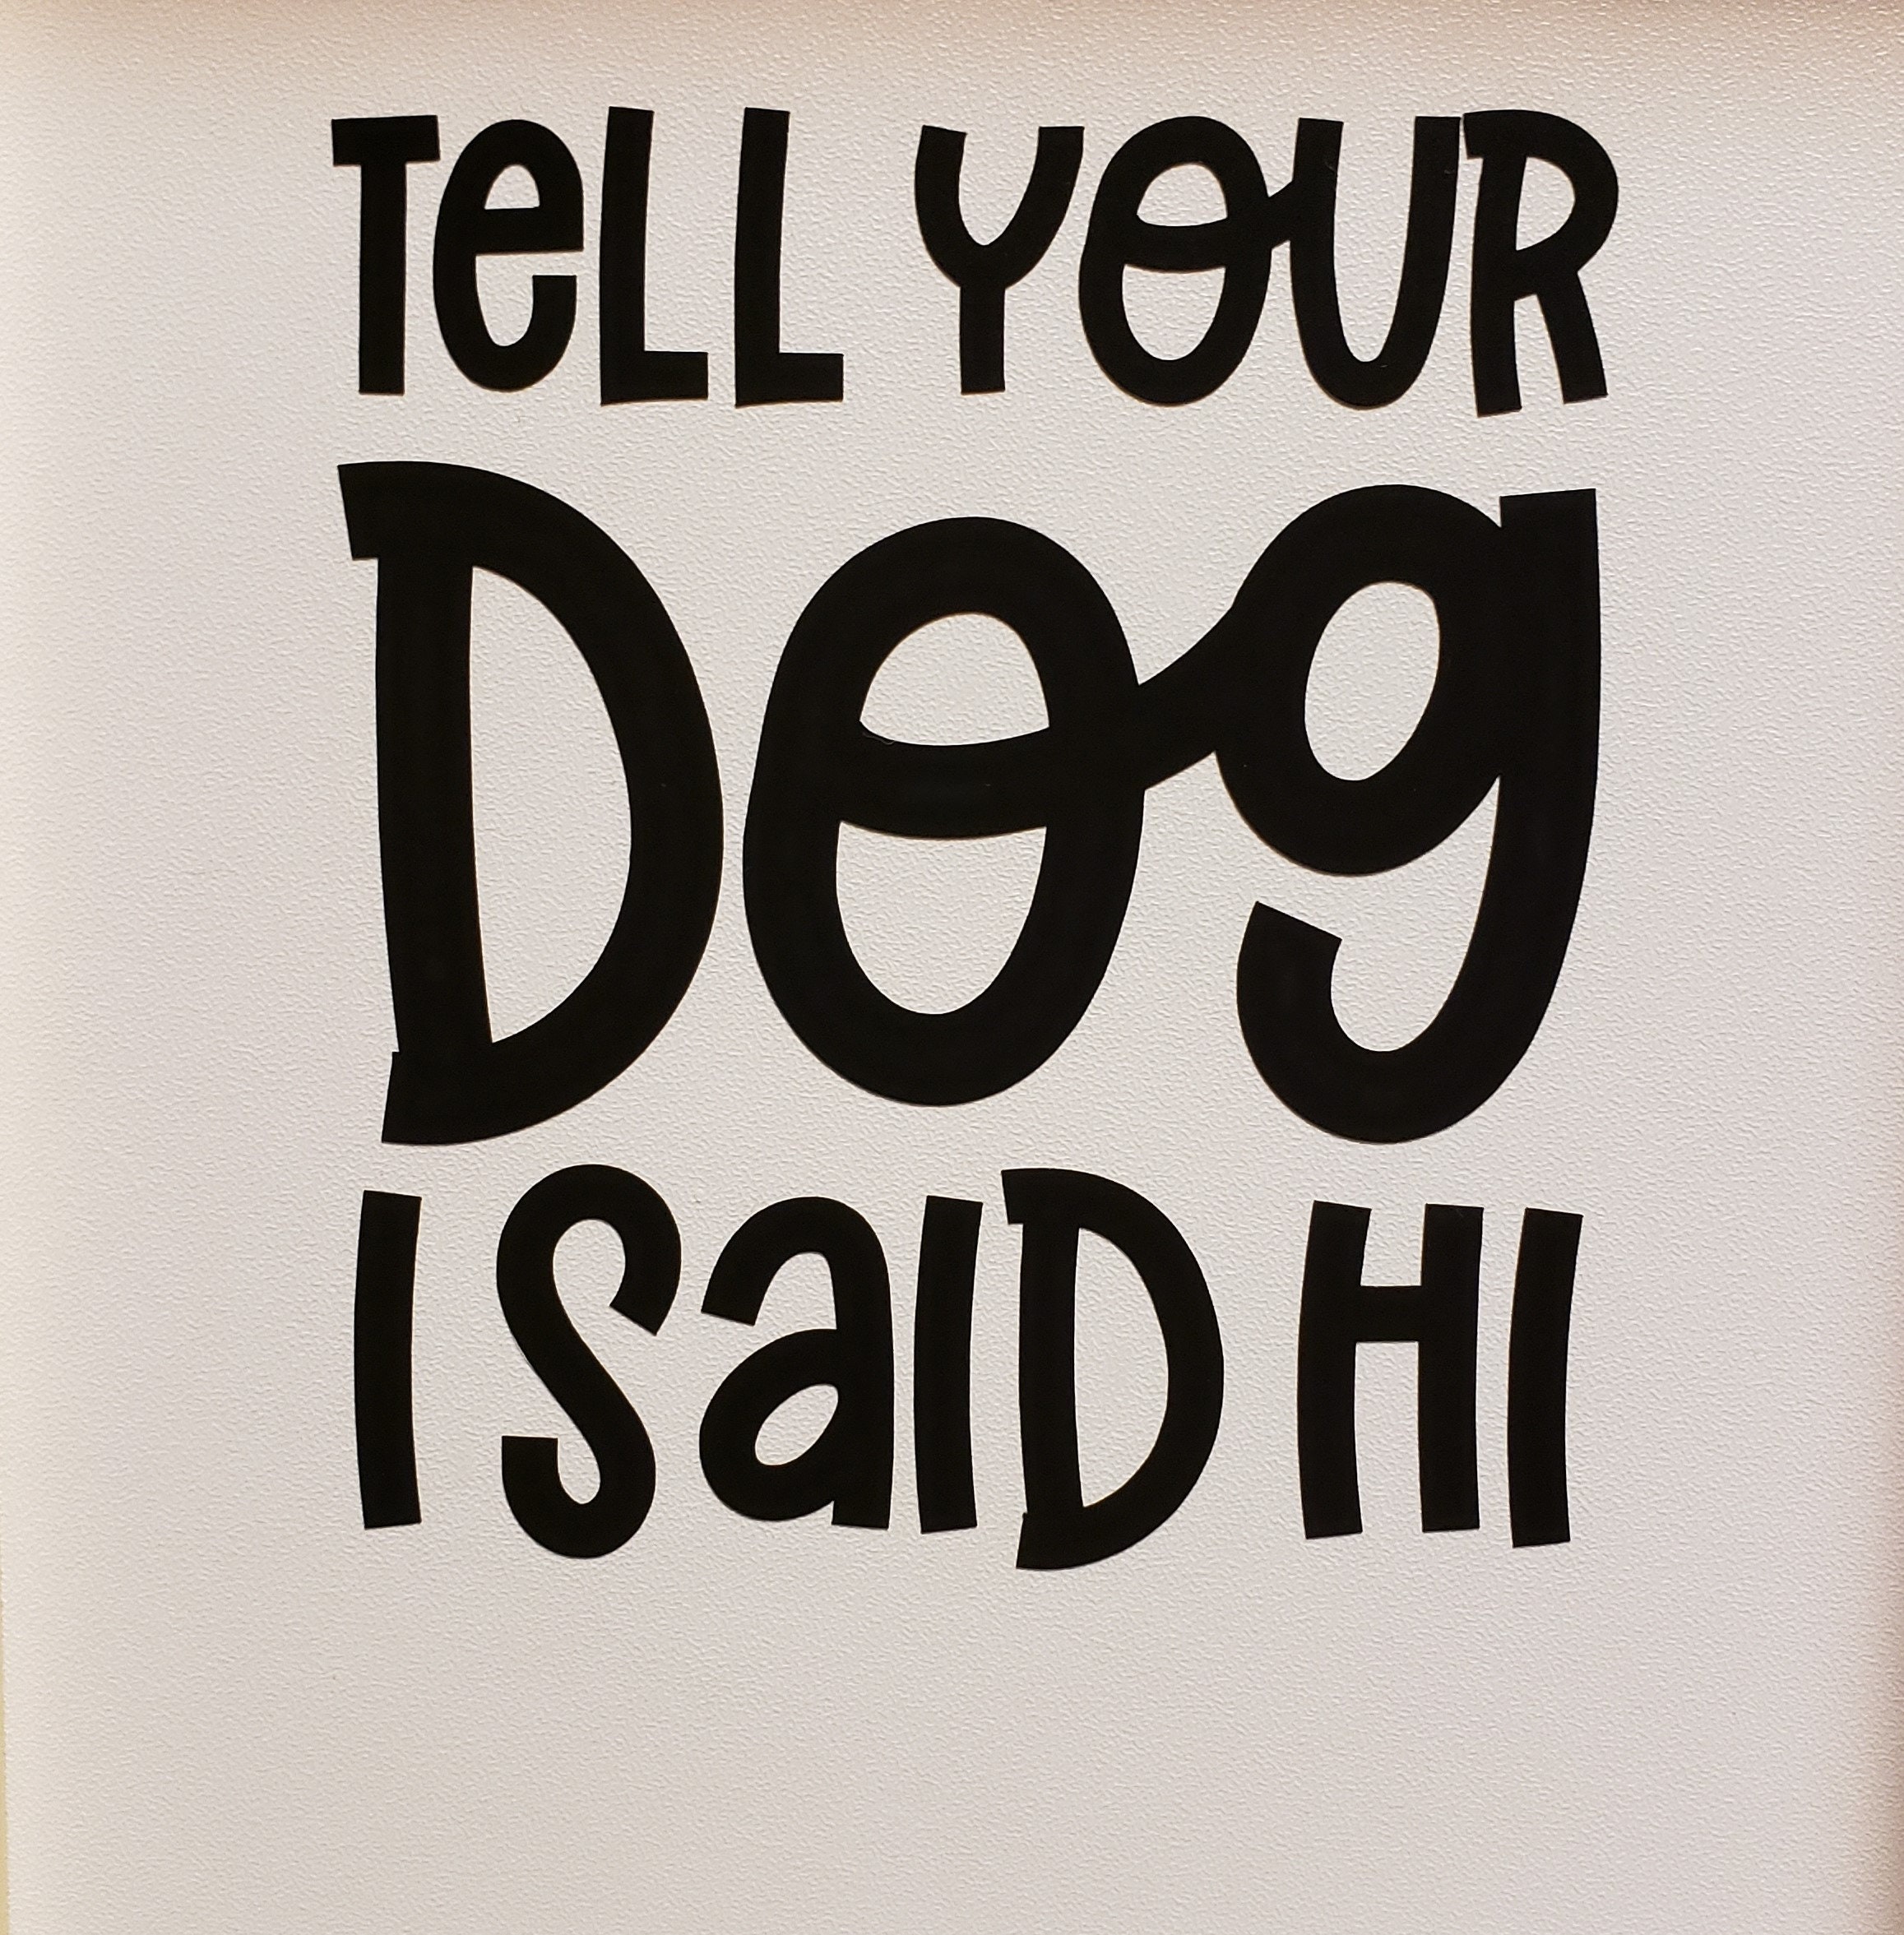 Tell Your Dog I Said Hi Svg Graphic by etcify · Creative Fabrica